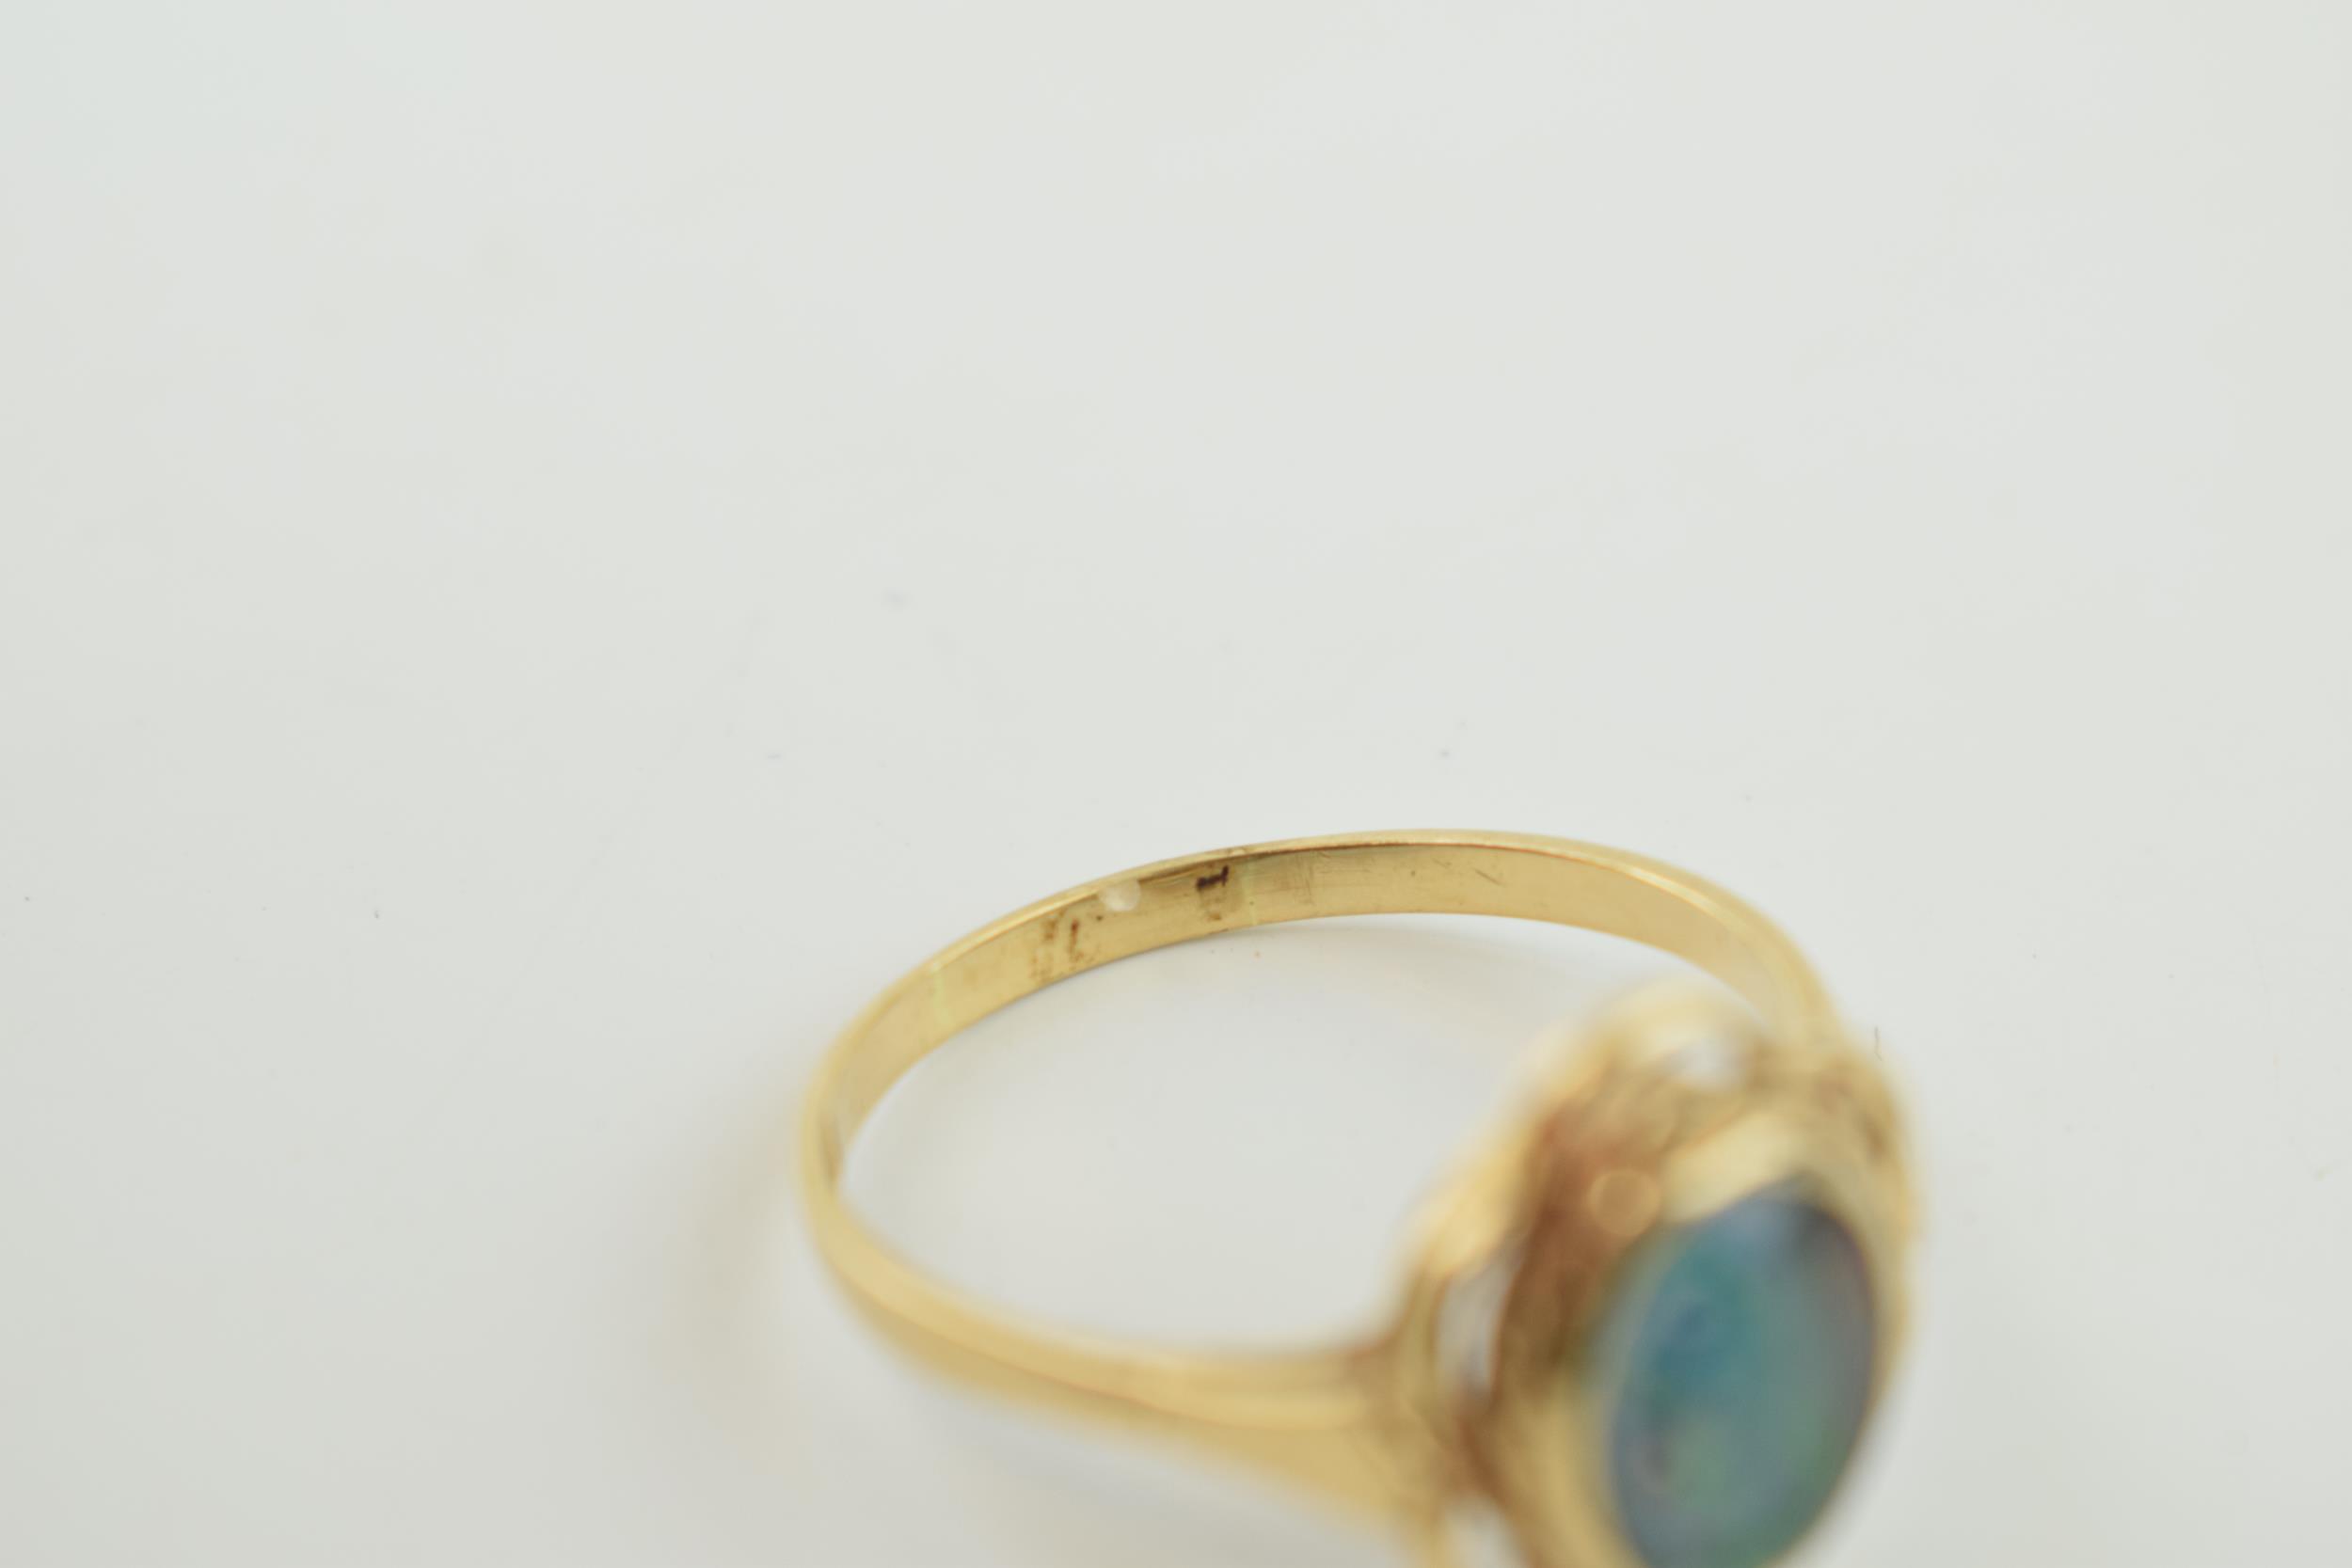 9ct gold and opal ring, stone badly scratched, and glued from behind. weight 3.3g. Size W. - Image 4 of 4